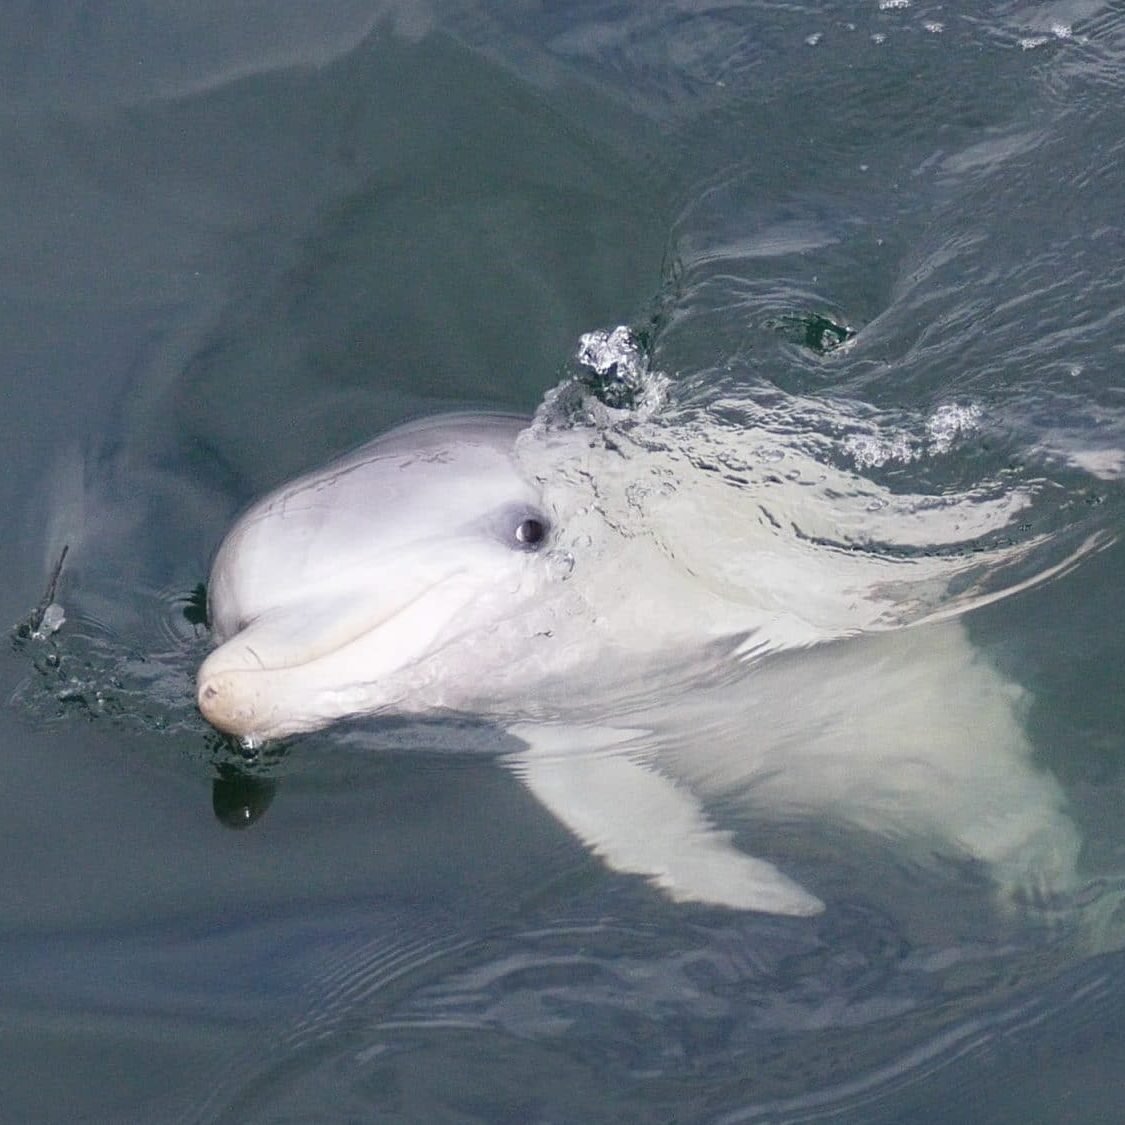 Squeak, one of the Port River dolphins